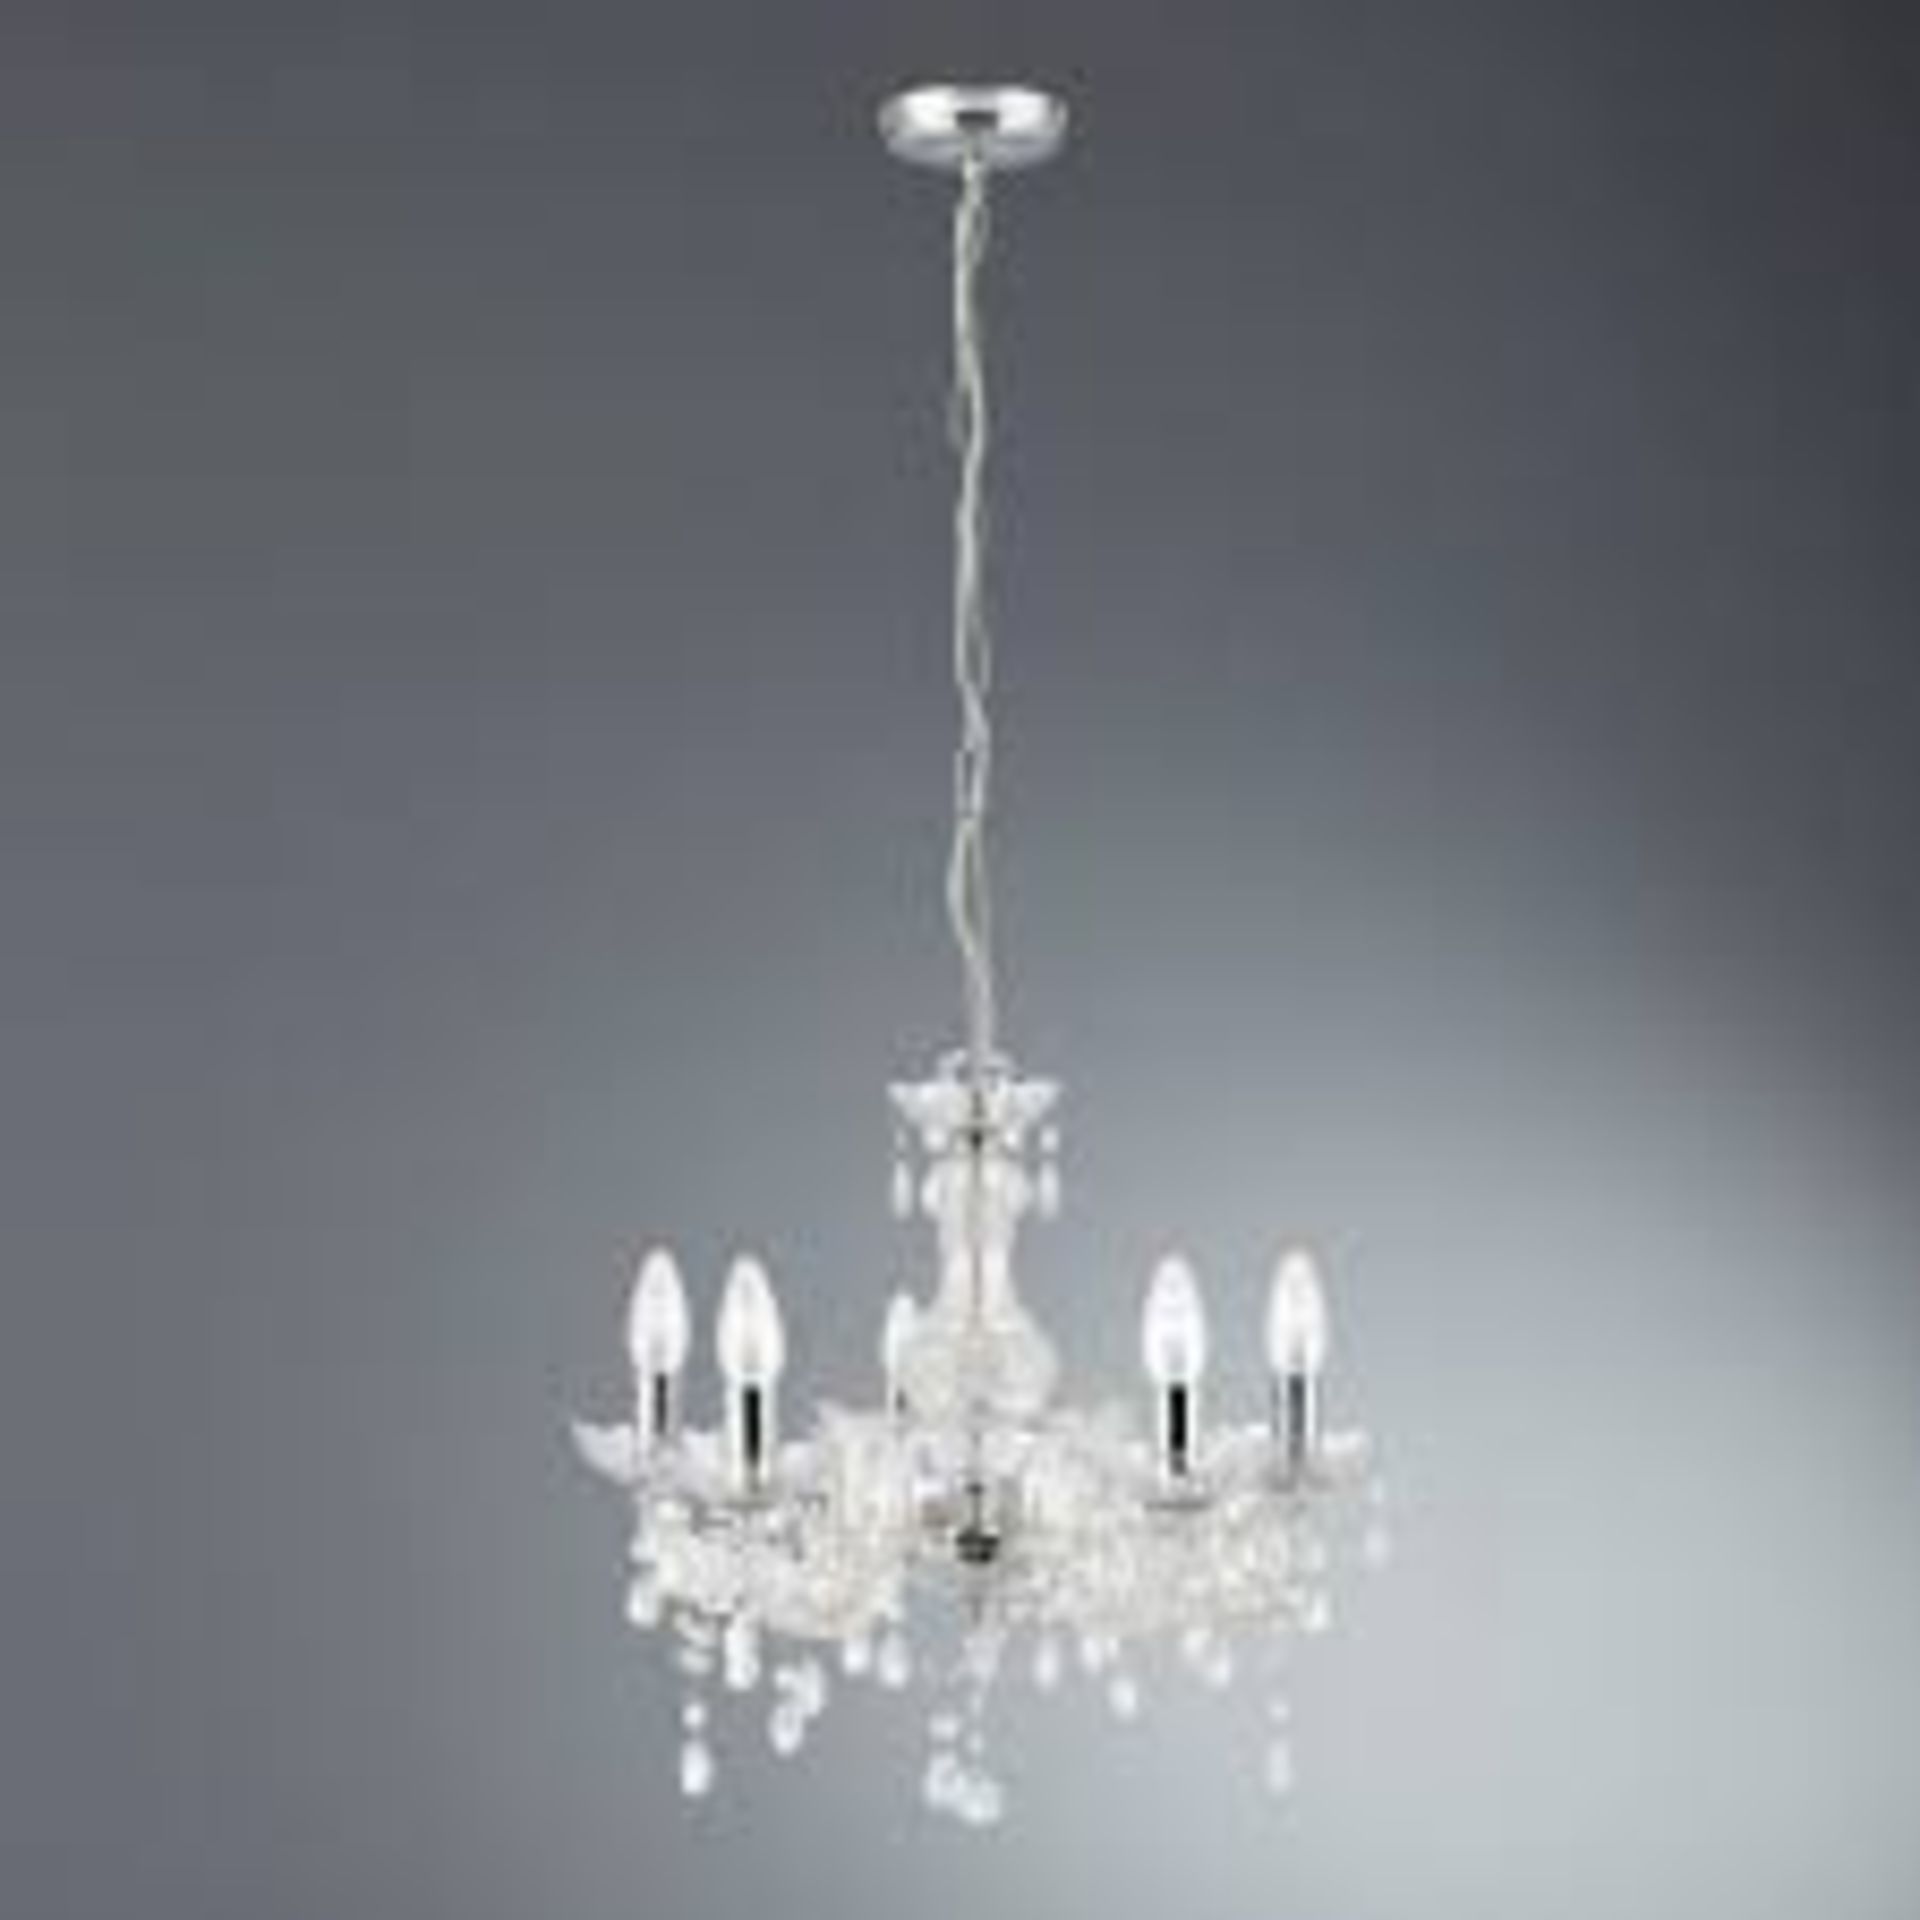 1 x Searchlight marie Therese Pendant in chrome - Ref: 1455-5CL - New and Boxed - RRP: £100.00 - Image 2 of 4